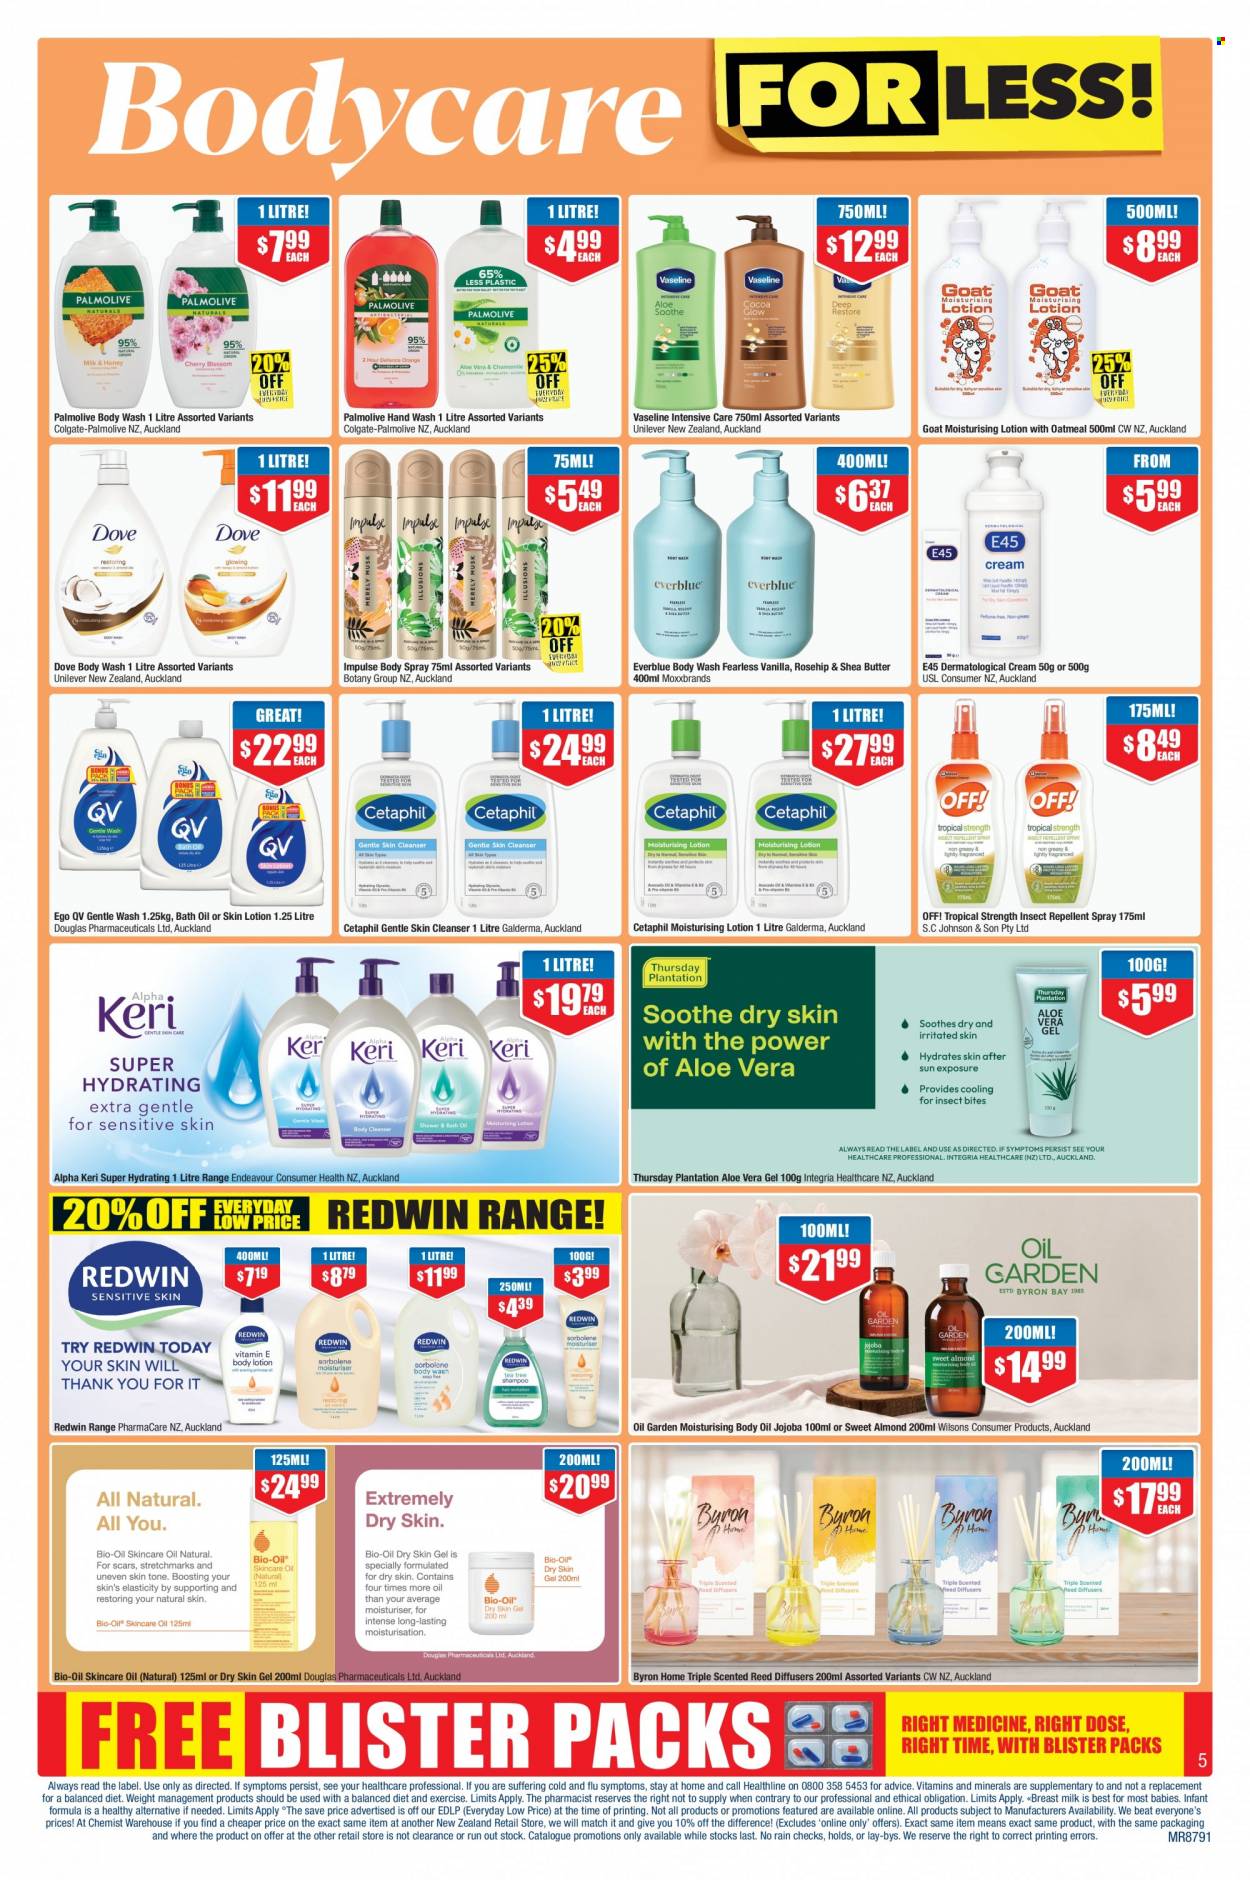 thumbnail - Chemist Warehouse mailer - 26.01.2023 - 19.02.2023 - Sales products - Johnson's, Dove, bath oil, body wash, hand wash, Palmolive, Vaseline, Keri, Colgate, cleanser, E45, body lotion, body oil, body spray, shea butter, repellent, diffuser. Page 5.